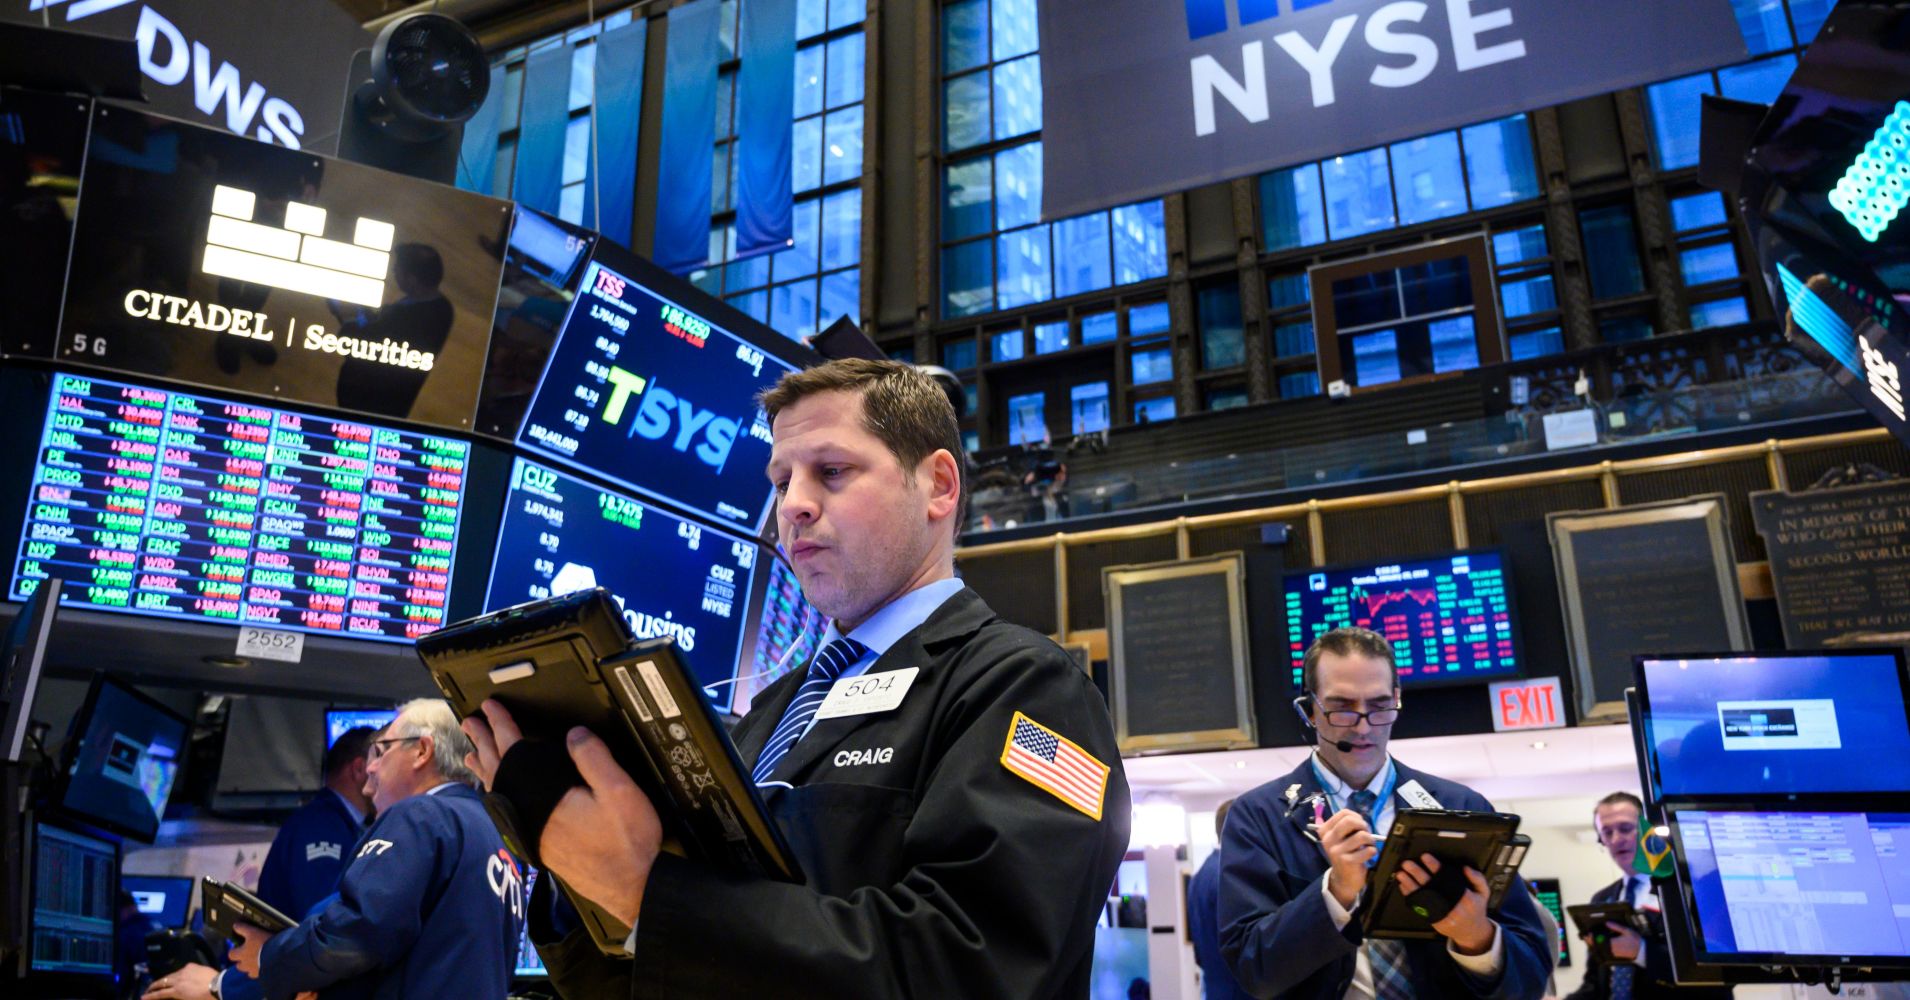 GDP data and corporate earnings in focus on Wall Street